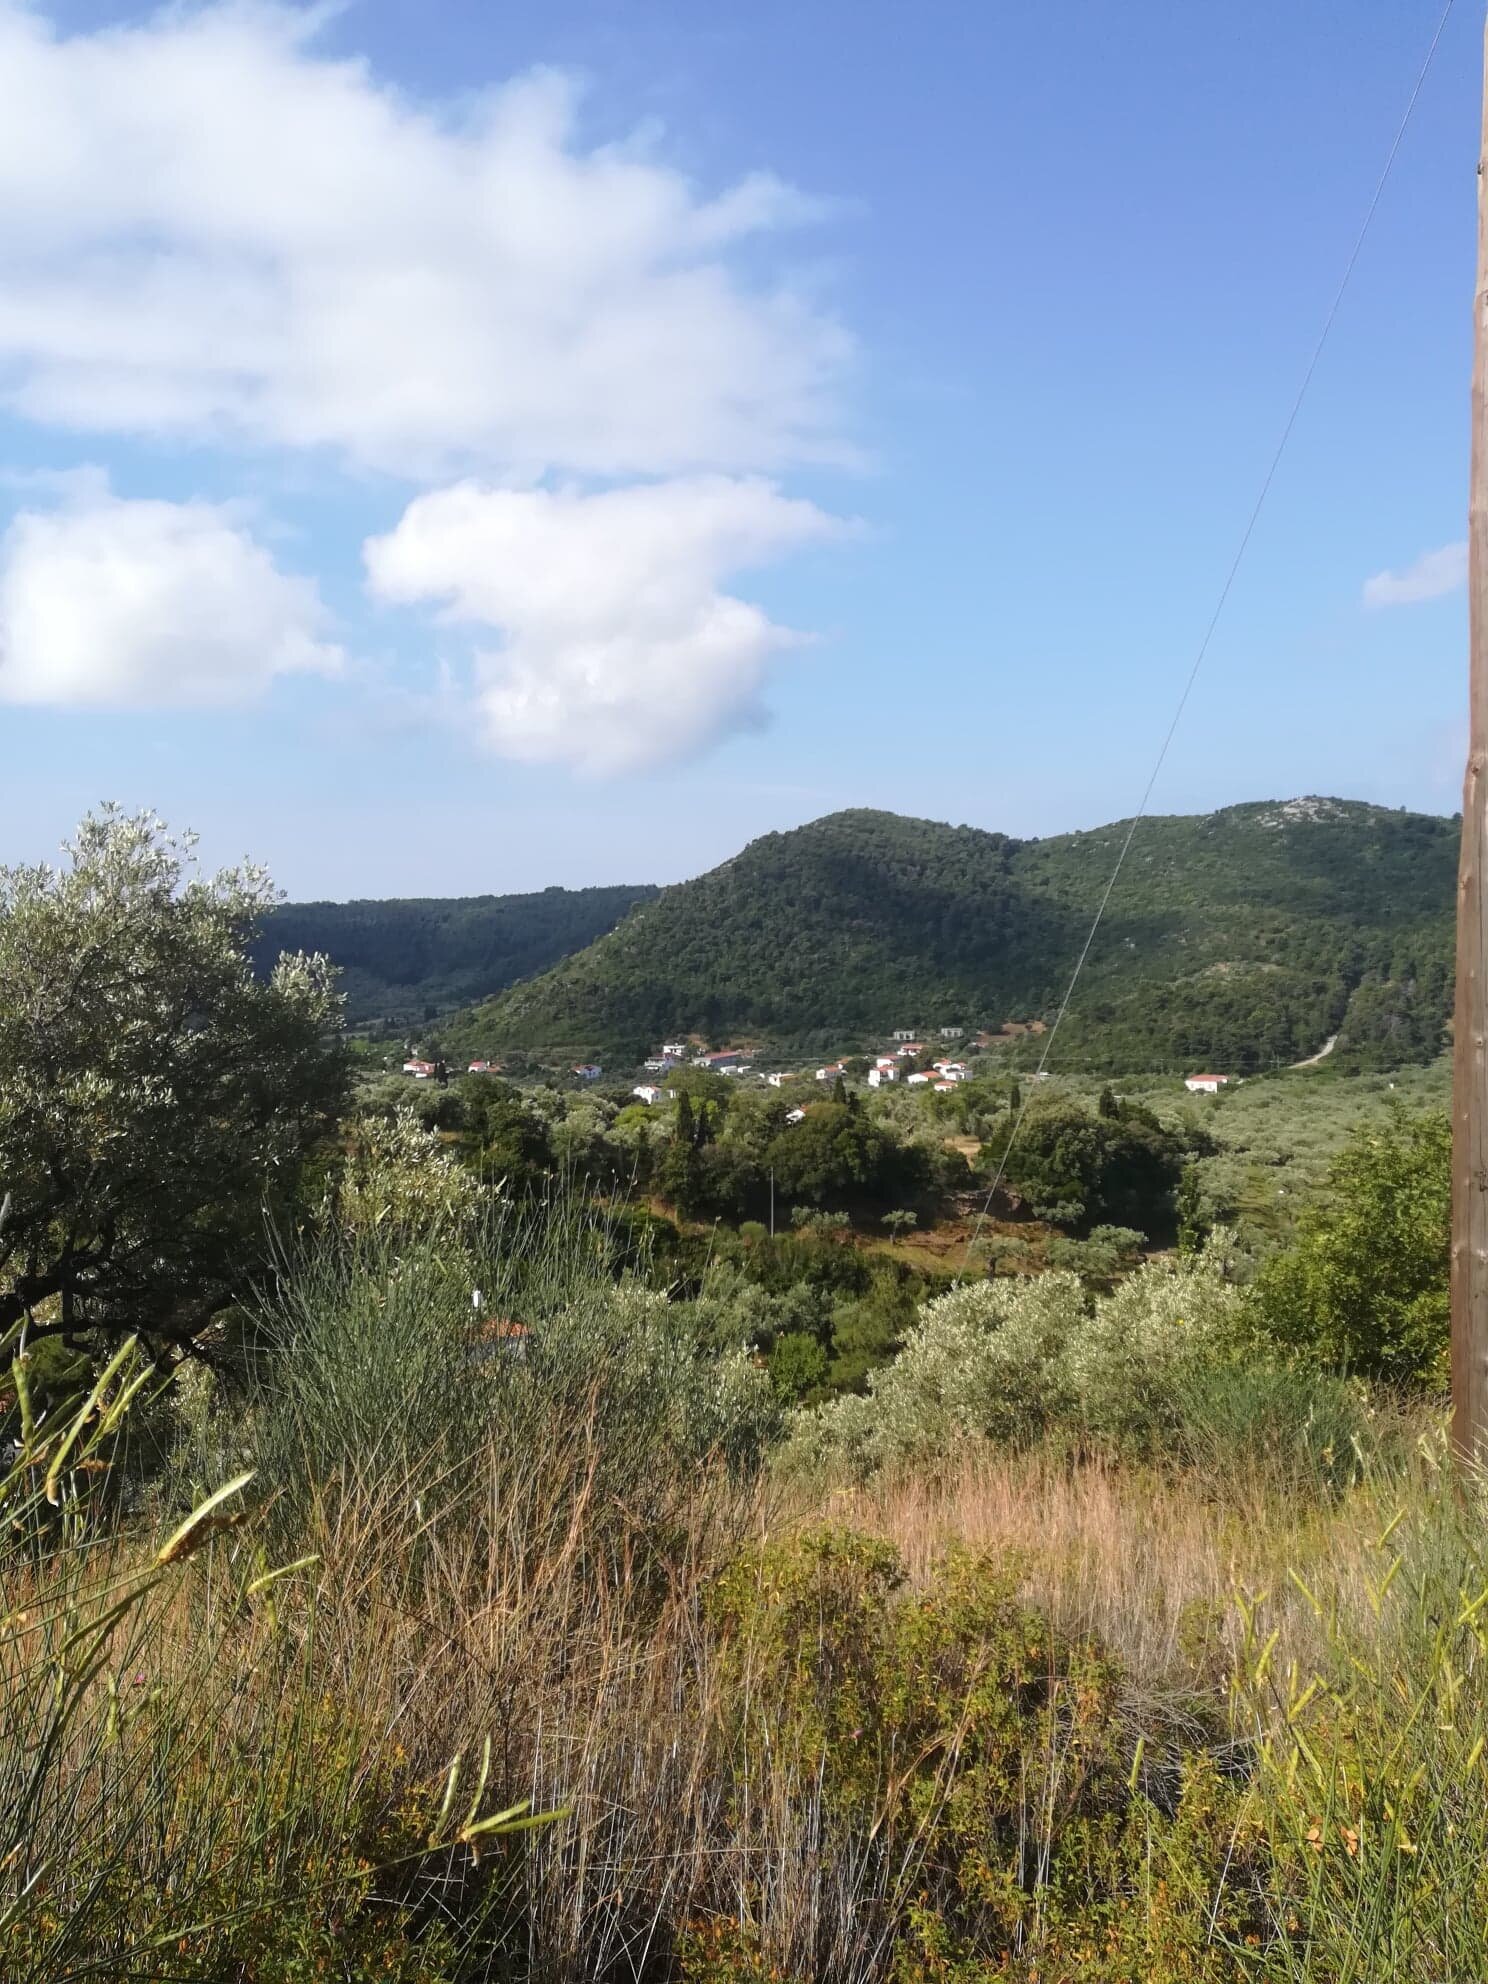 opportunity_to_buy_land_close_to_skopelos_green.jpg